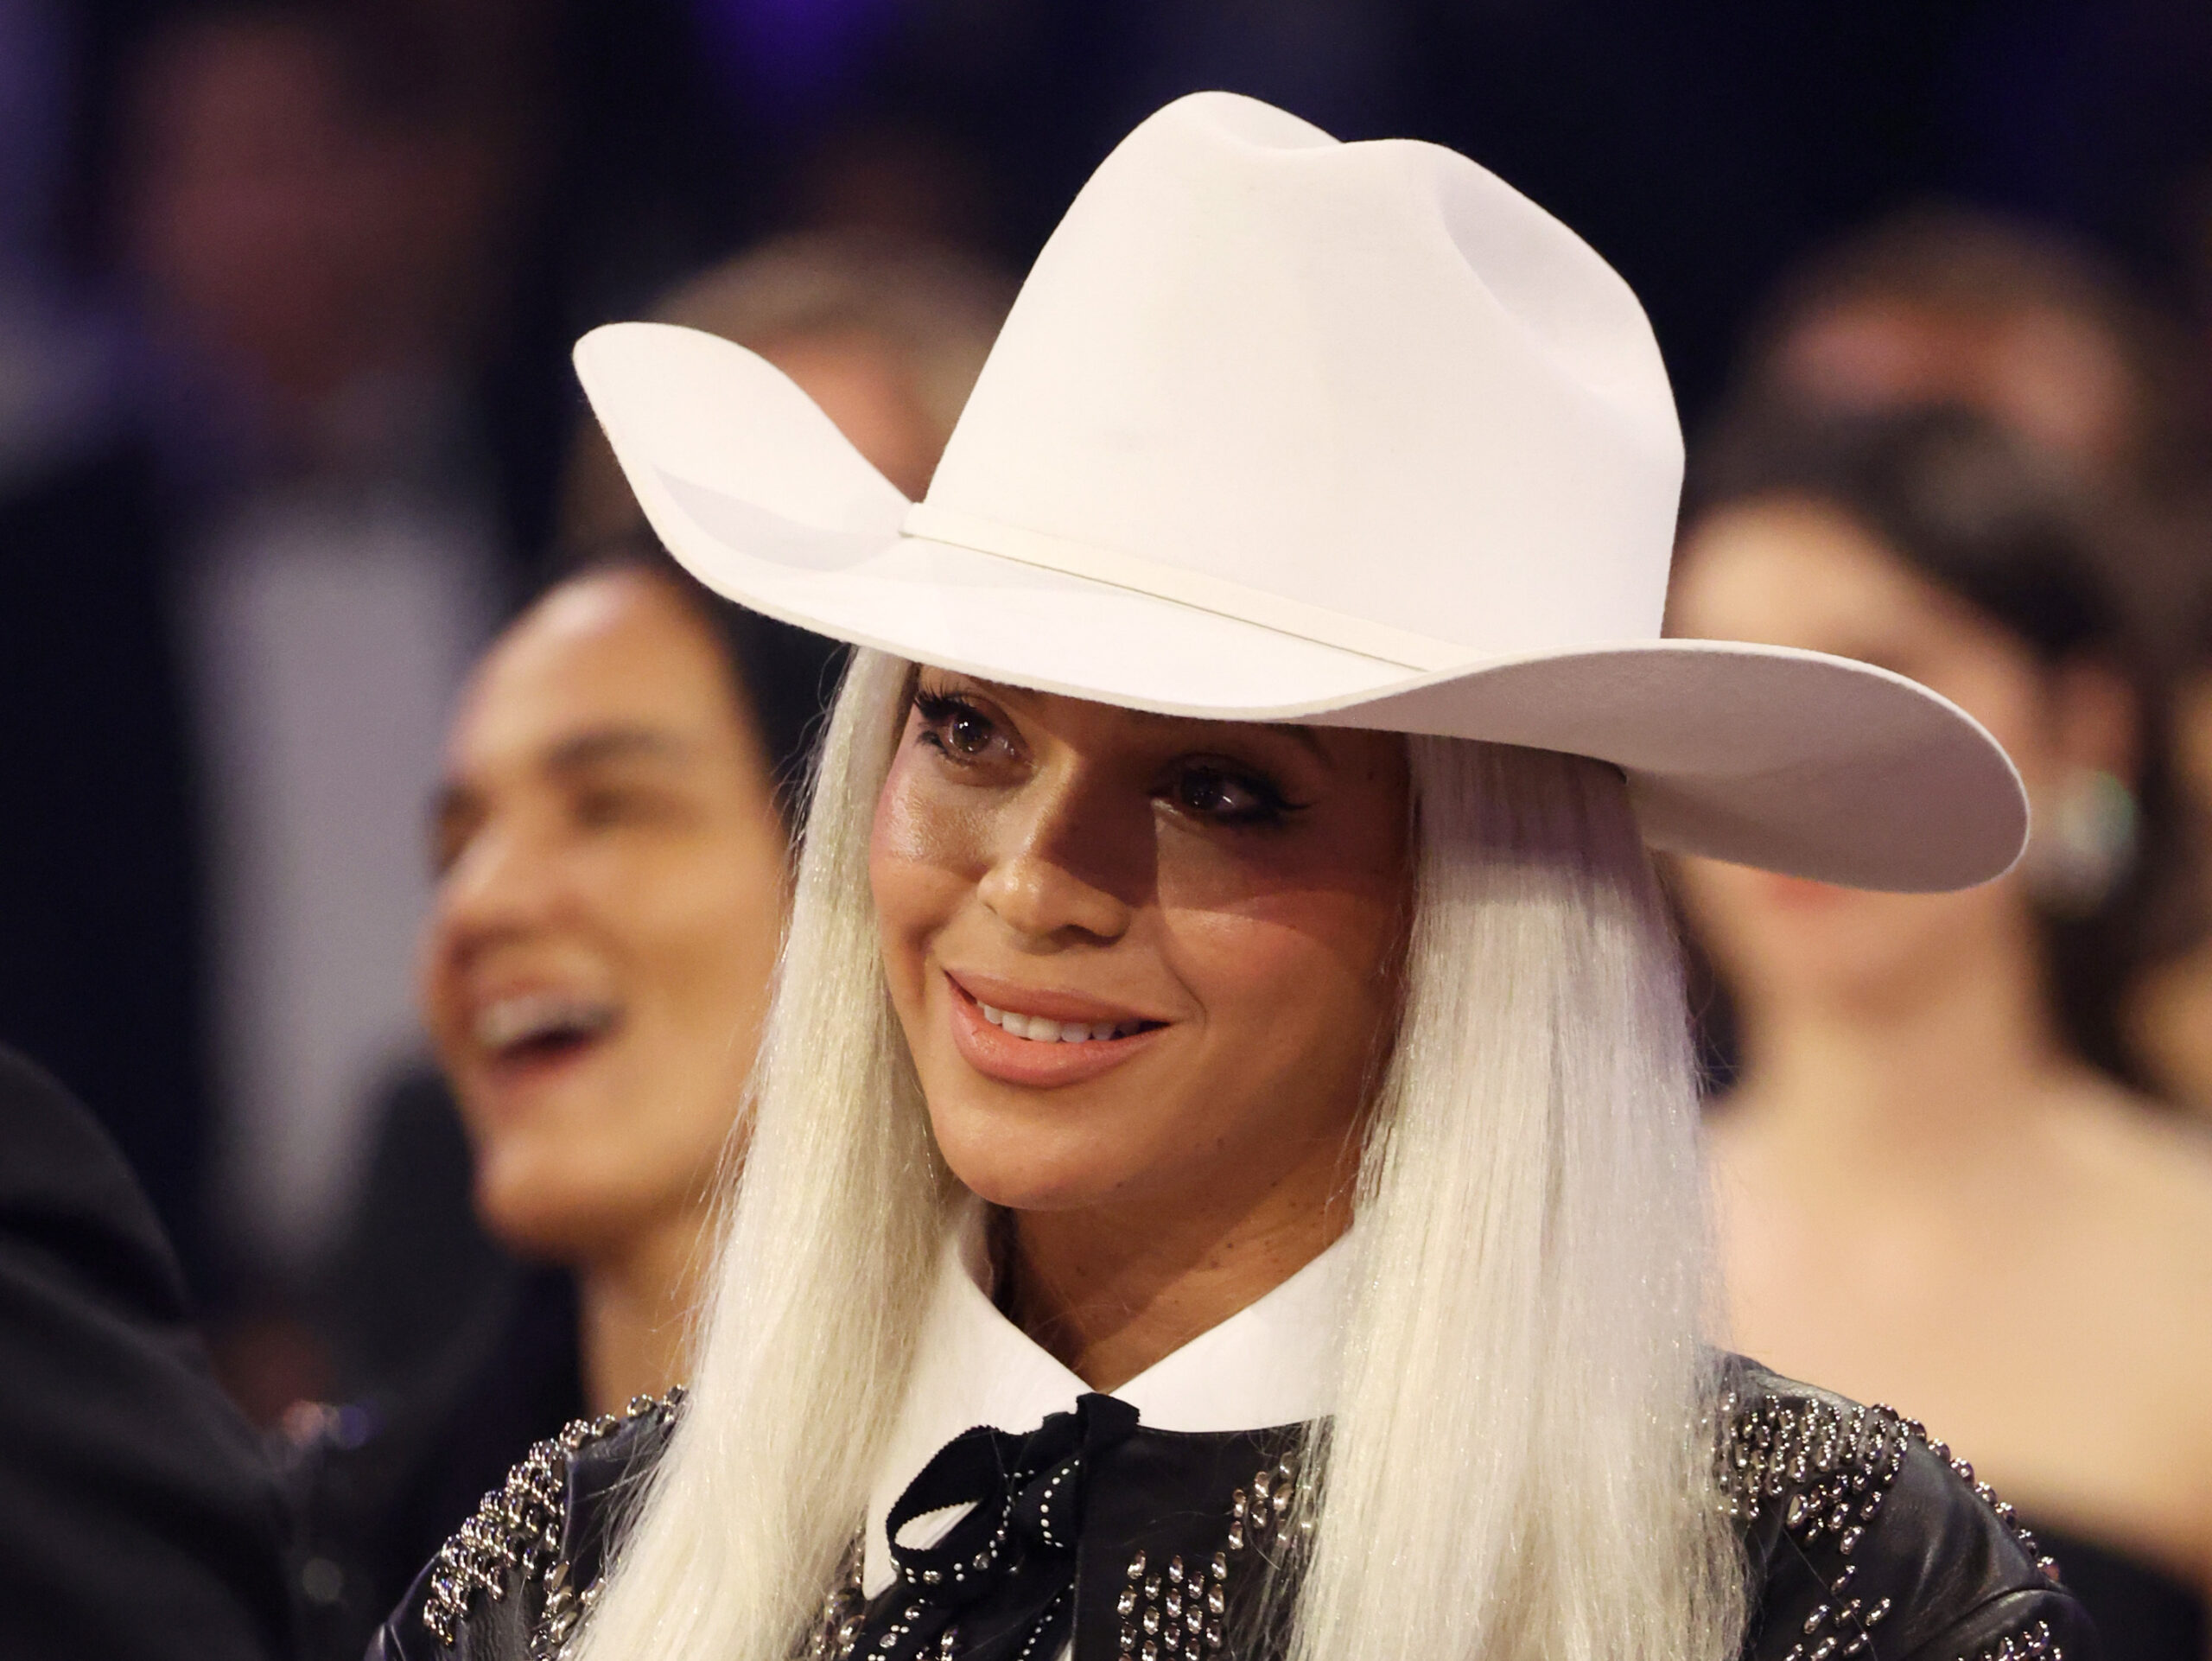 A radio station is now playing Beyoncé’s country song after an outcry from fans